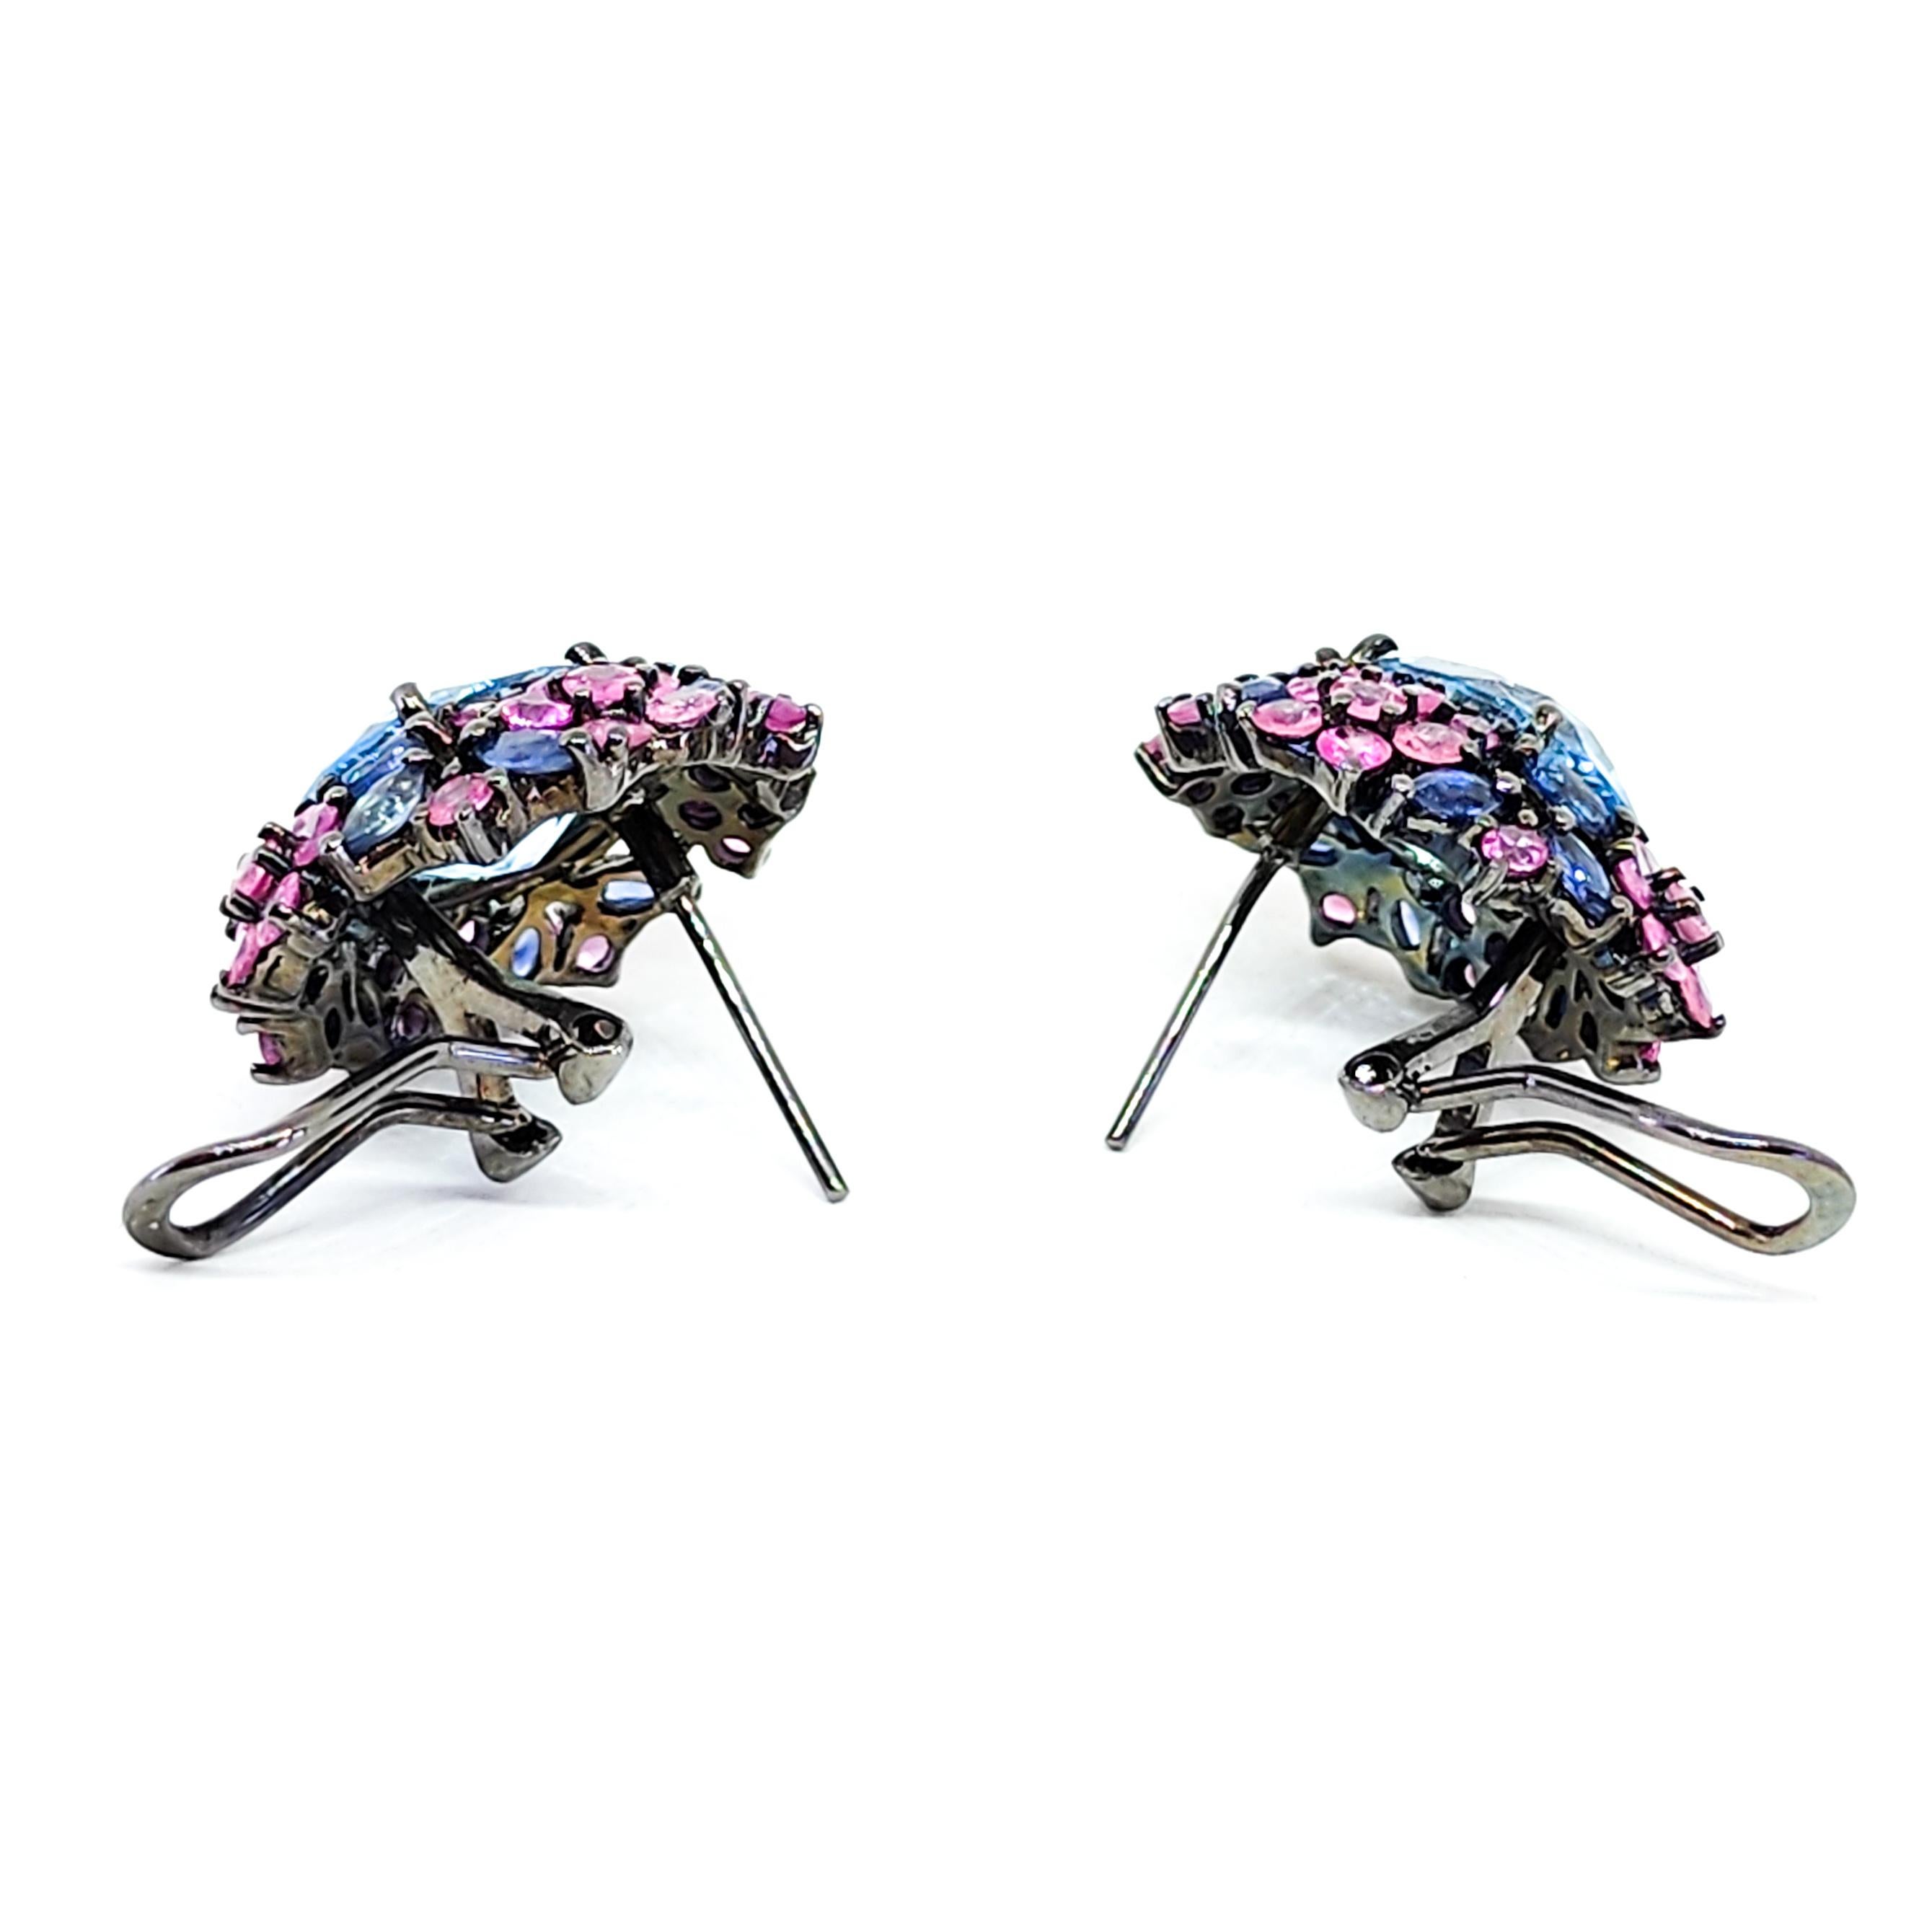 Contemporary 21ct Candy Color Blue Topaz Pink Sapphire Purple Tanzanite Cluster Earrings 925